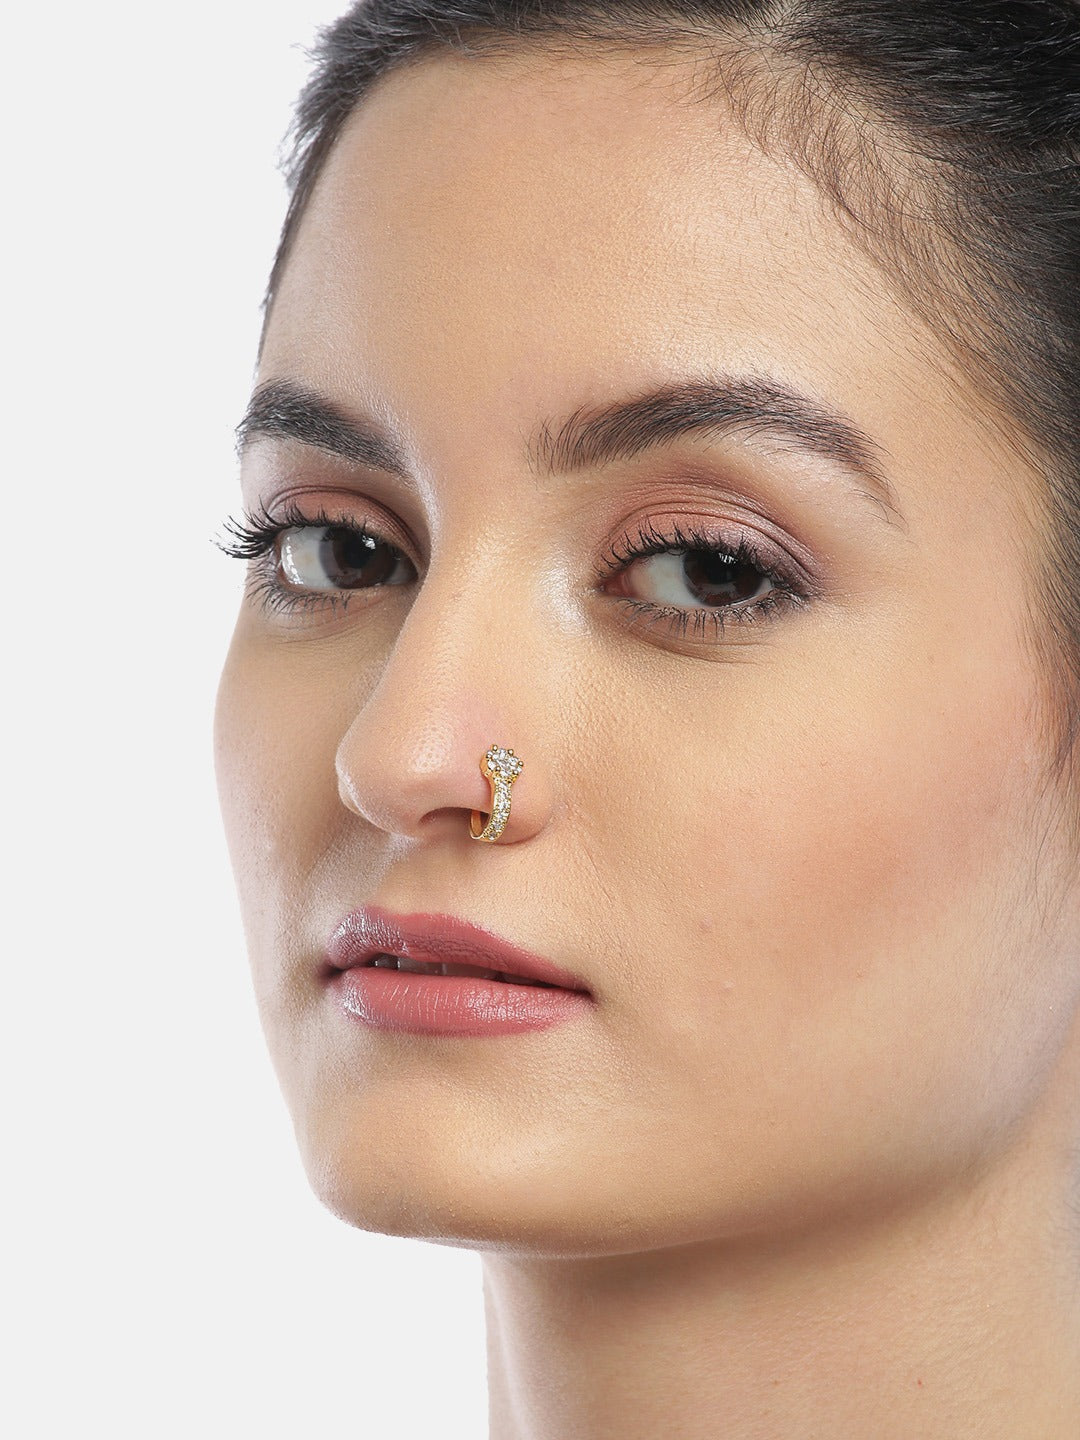 Trillian Nose Stud Hot Pink Stone Nose Ring L Bend Nose - Etsy | Nose  jewelry, Body jewelry nose, Nose piercing jewelry